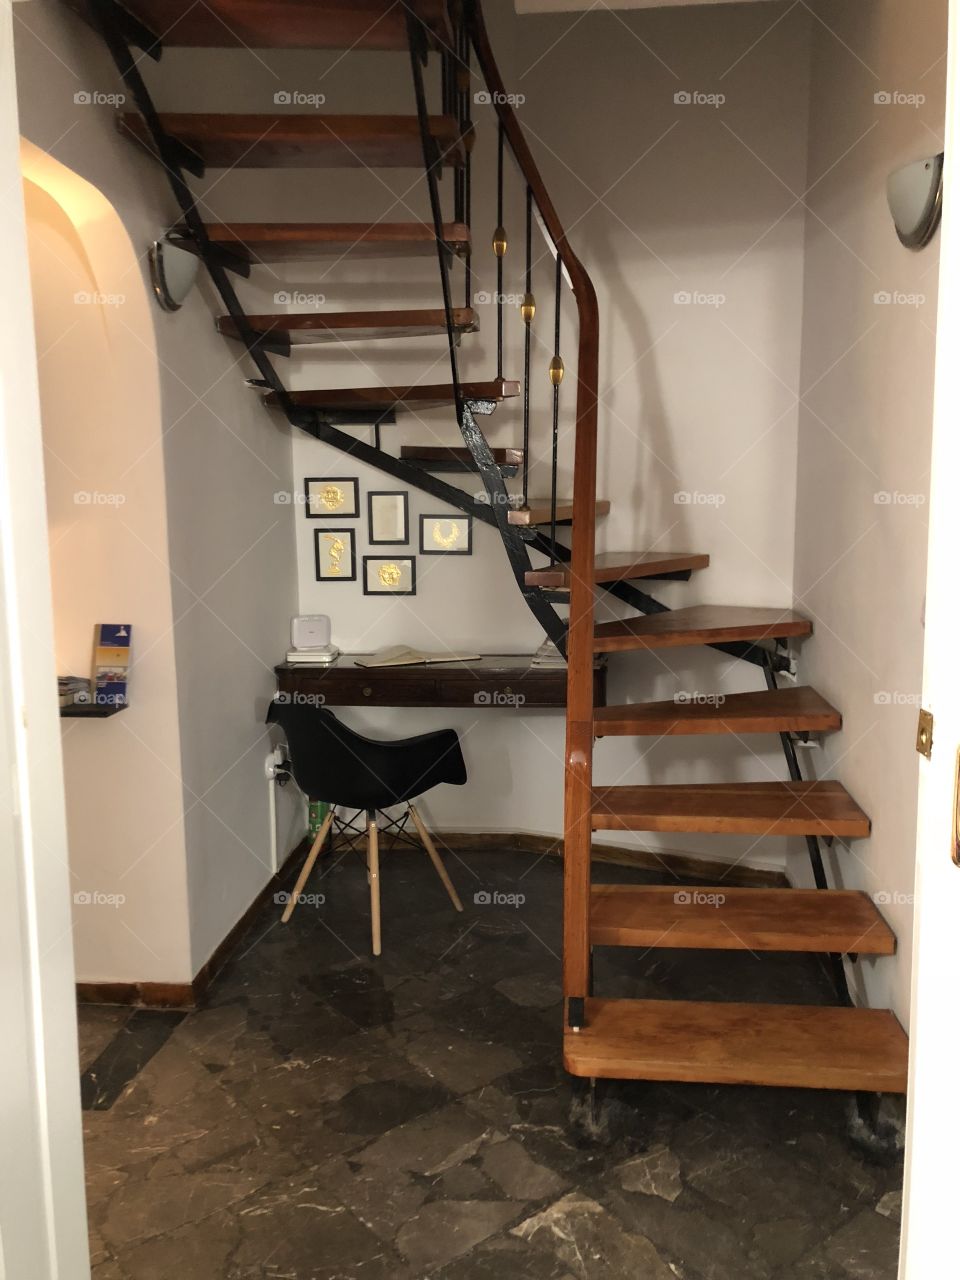 Airbnb stairwell in Greece 